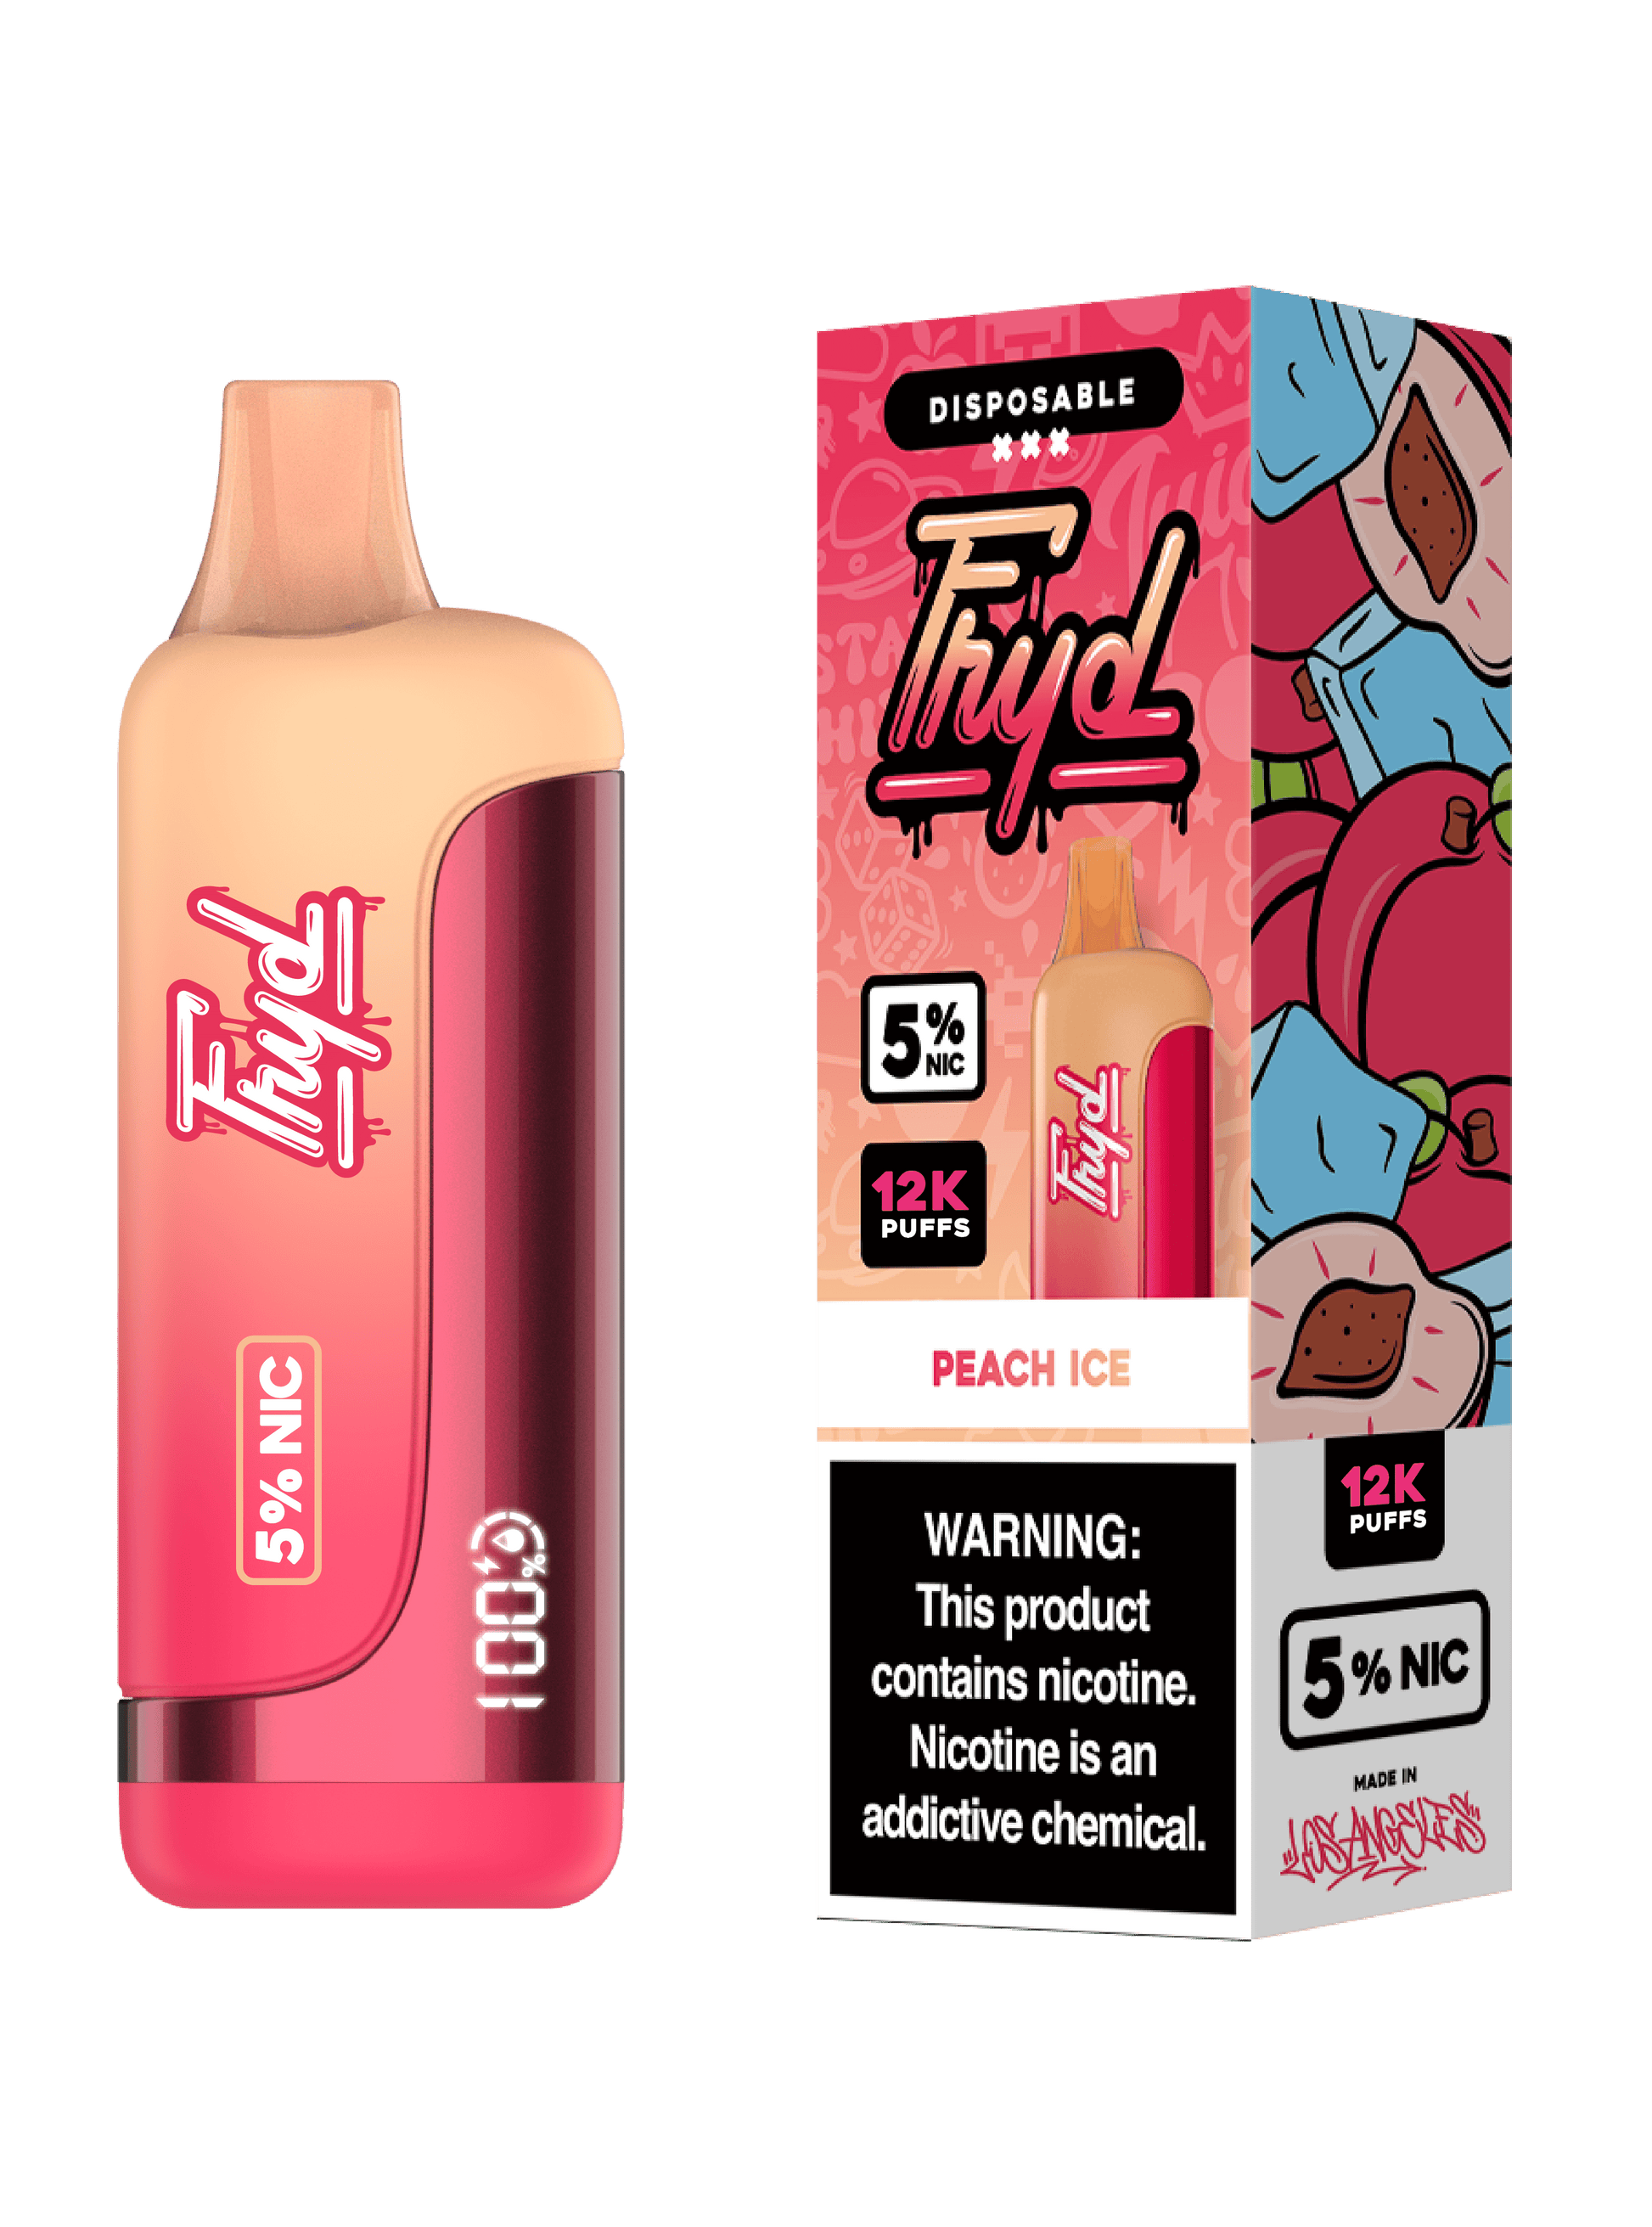 FRYD Disposable 12,0000 Puffs (17mL) 50mg Peach Ice with packaging